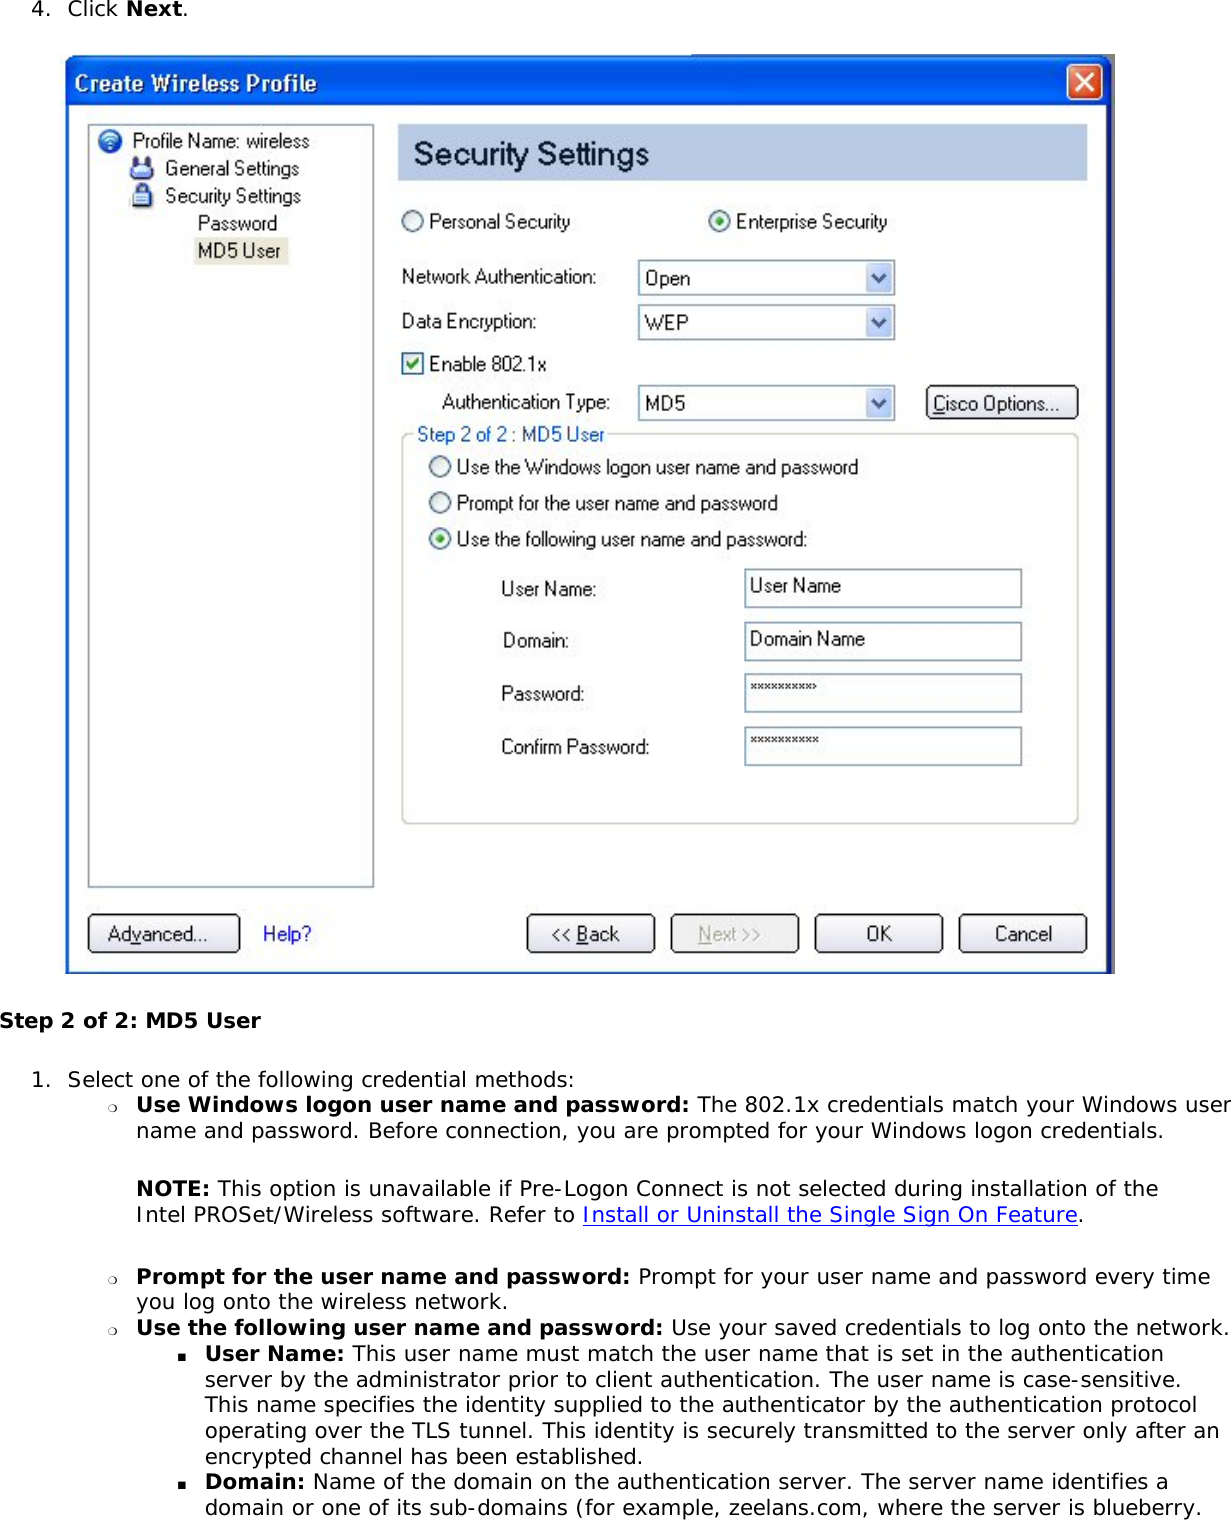 4.  Click Next.  Step 2 of 2: MD5 User 1.  Select one of the following credential methods: ❍     Use Windows logon user name and password: The 802.1x credentials match your Windows user name and password. Before connection, you are prompted for your Windows logon credentials. NOTE: This option is unavailable if Pre-Logon Connect is not selected during installation of the Intel PROSet/Wireless software. Refer to Install or Uninstall the Single Sign On Feature. ❍     Prompt for the user name and password: Prompt for your user name and password every time you log onto the wireless network. ❍     Use the following user name and password: Use your saved credentials to log onto the network. ■     User Name: This user name must match the user name that is set in the authentication server by the administrator prior to client authentication. The user name is case-sensitive. This name specifies the identity supplied to the authenticator by the authentication protocol operating over the TLS tunnel. This identity is securely transmitted to the server only after an encrypted channel has been established. ■     Domain: Name of the domain on the authentication server. The server name identifies a domain or one of its sub-domains (for example, zeelans.com, where the server is blueberry.